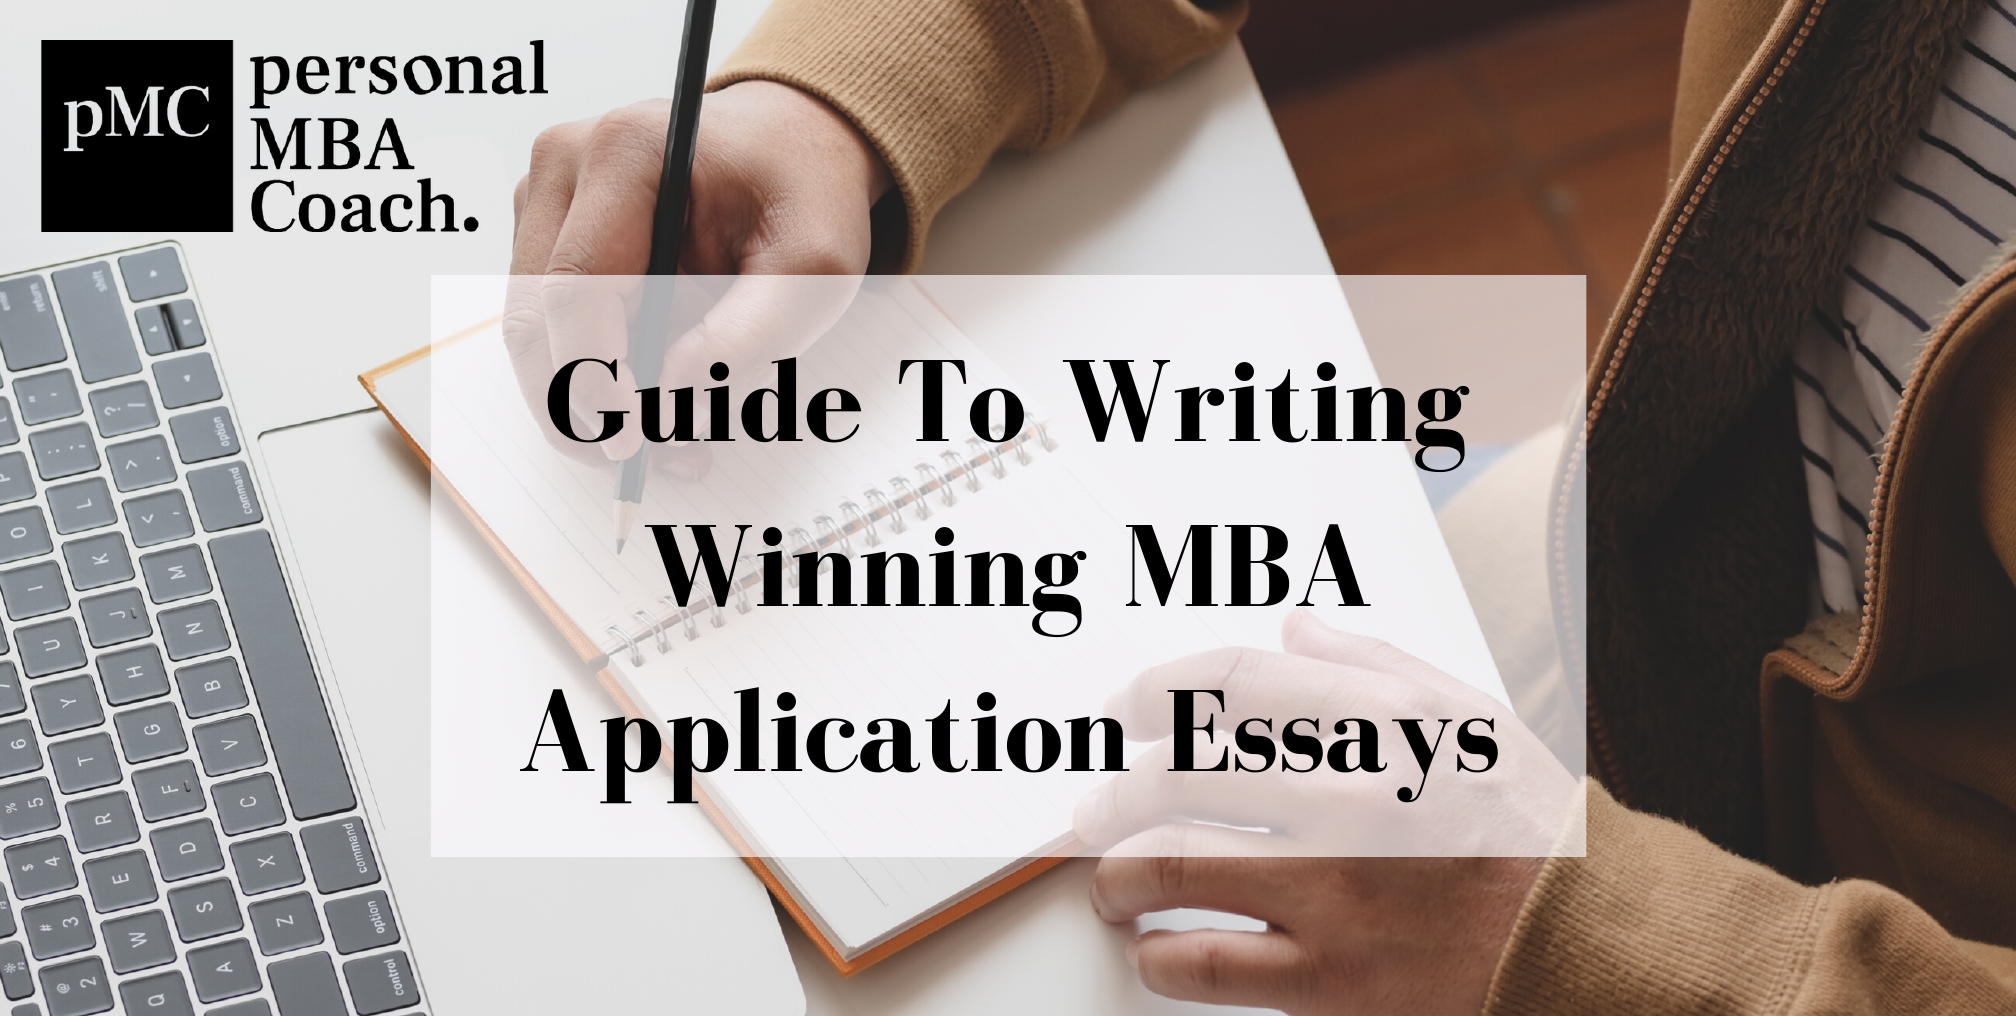 MBA application essay questions